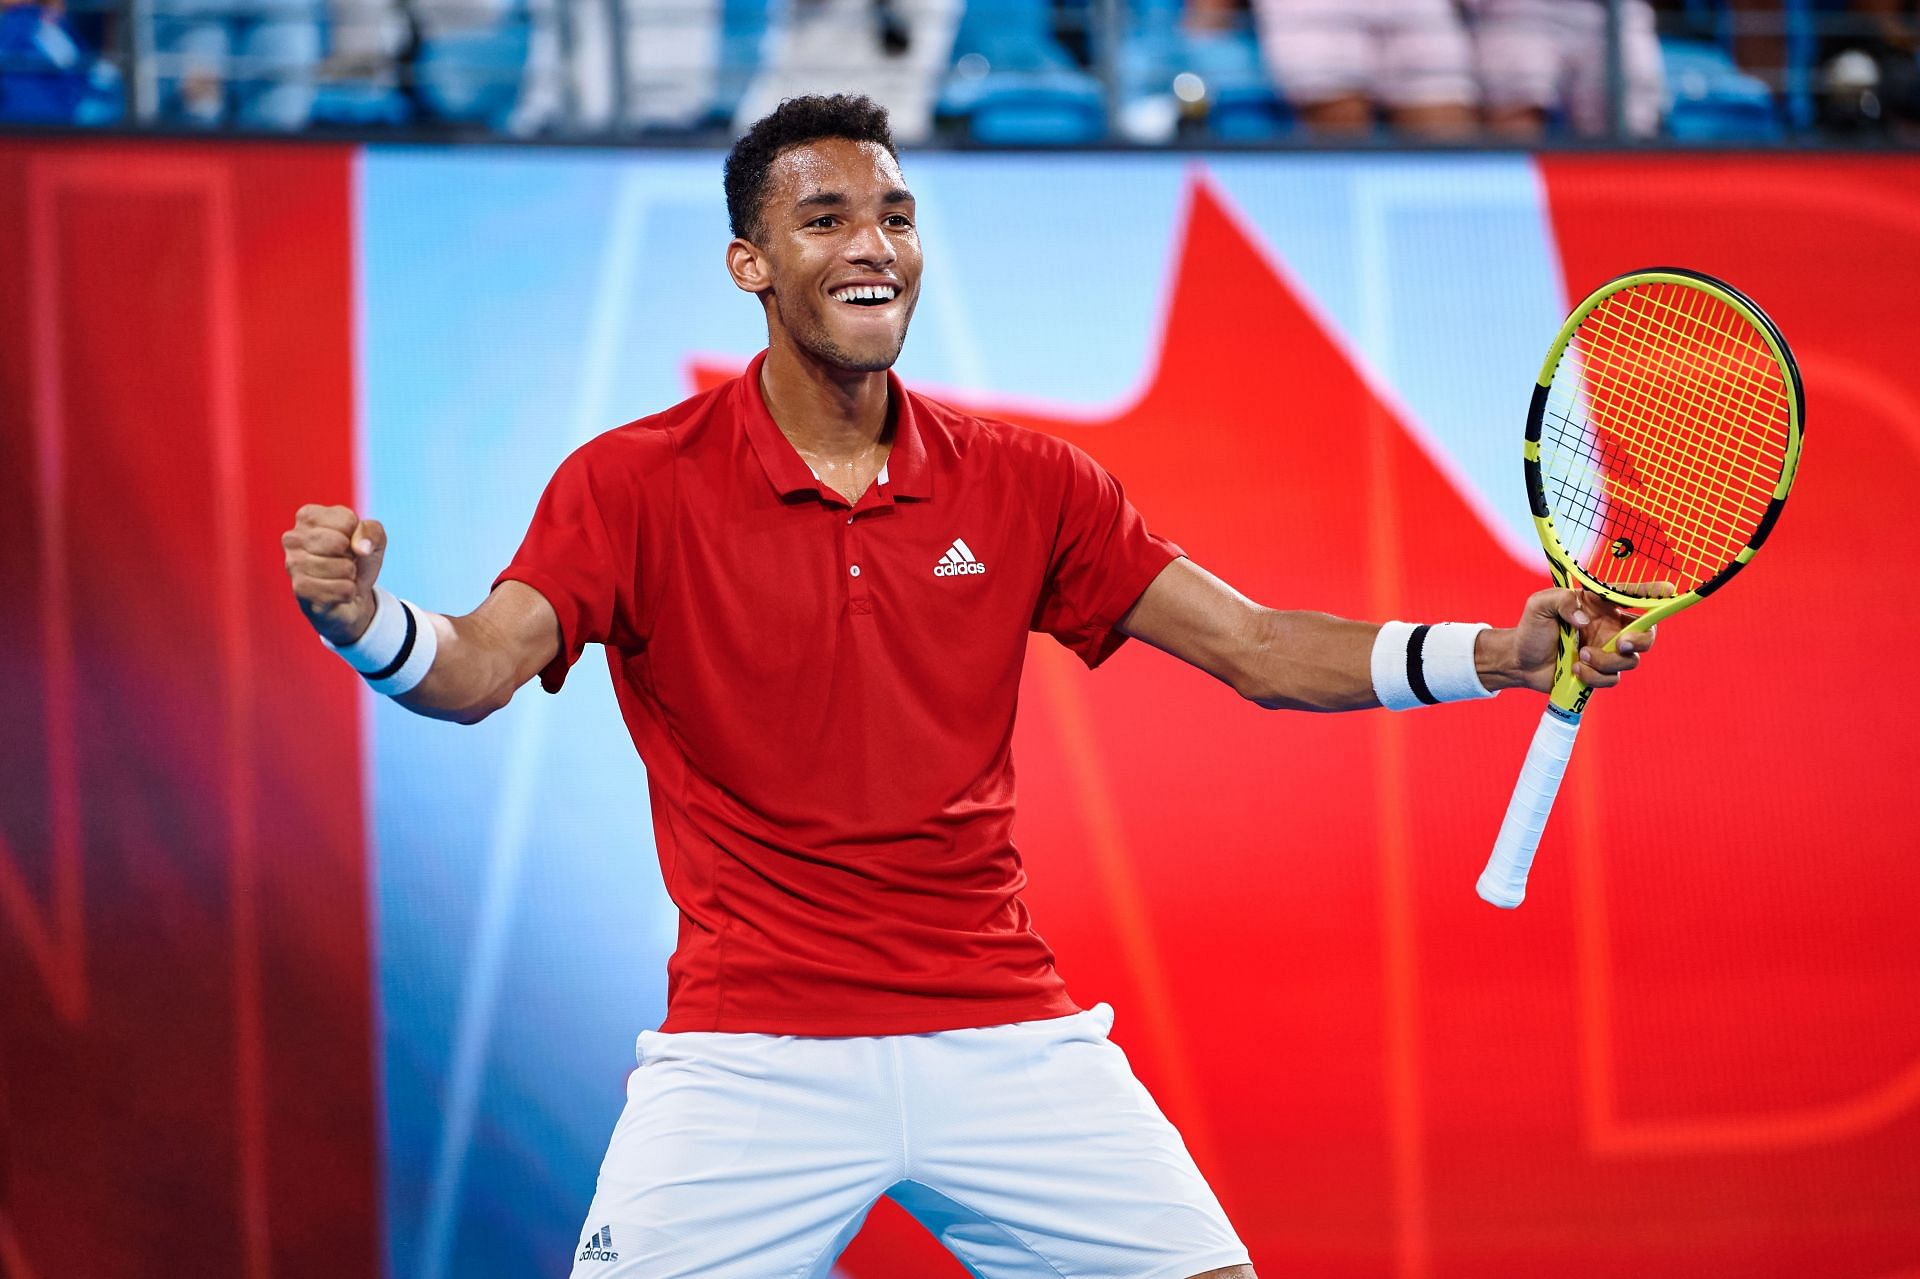 Felix Auger-Aliassime is the third seed at the Swiss Indoors.